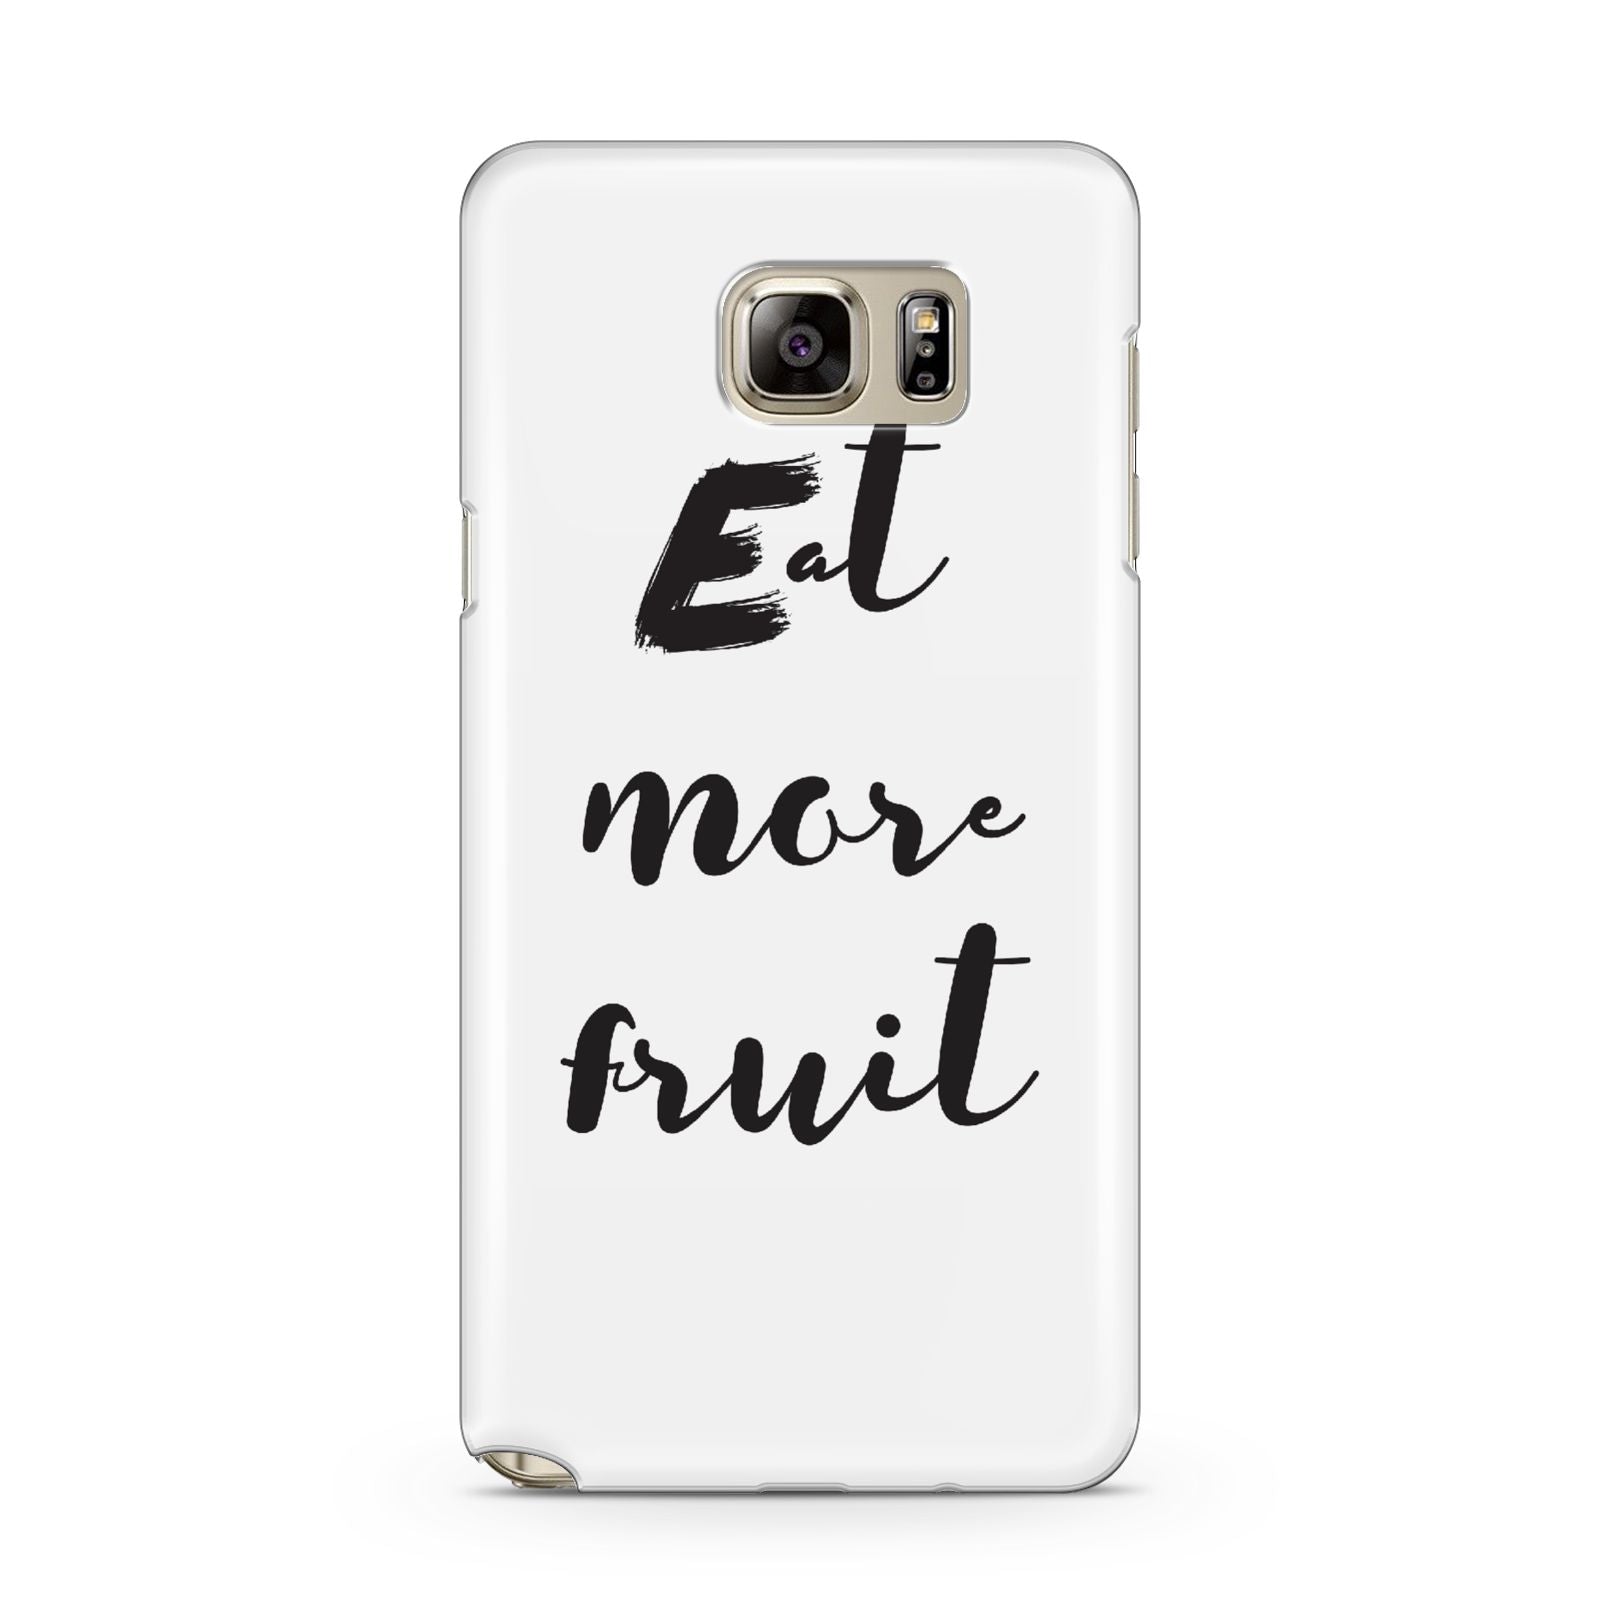 Eat More Fruit Samsung Galaxy Note 5 Case